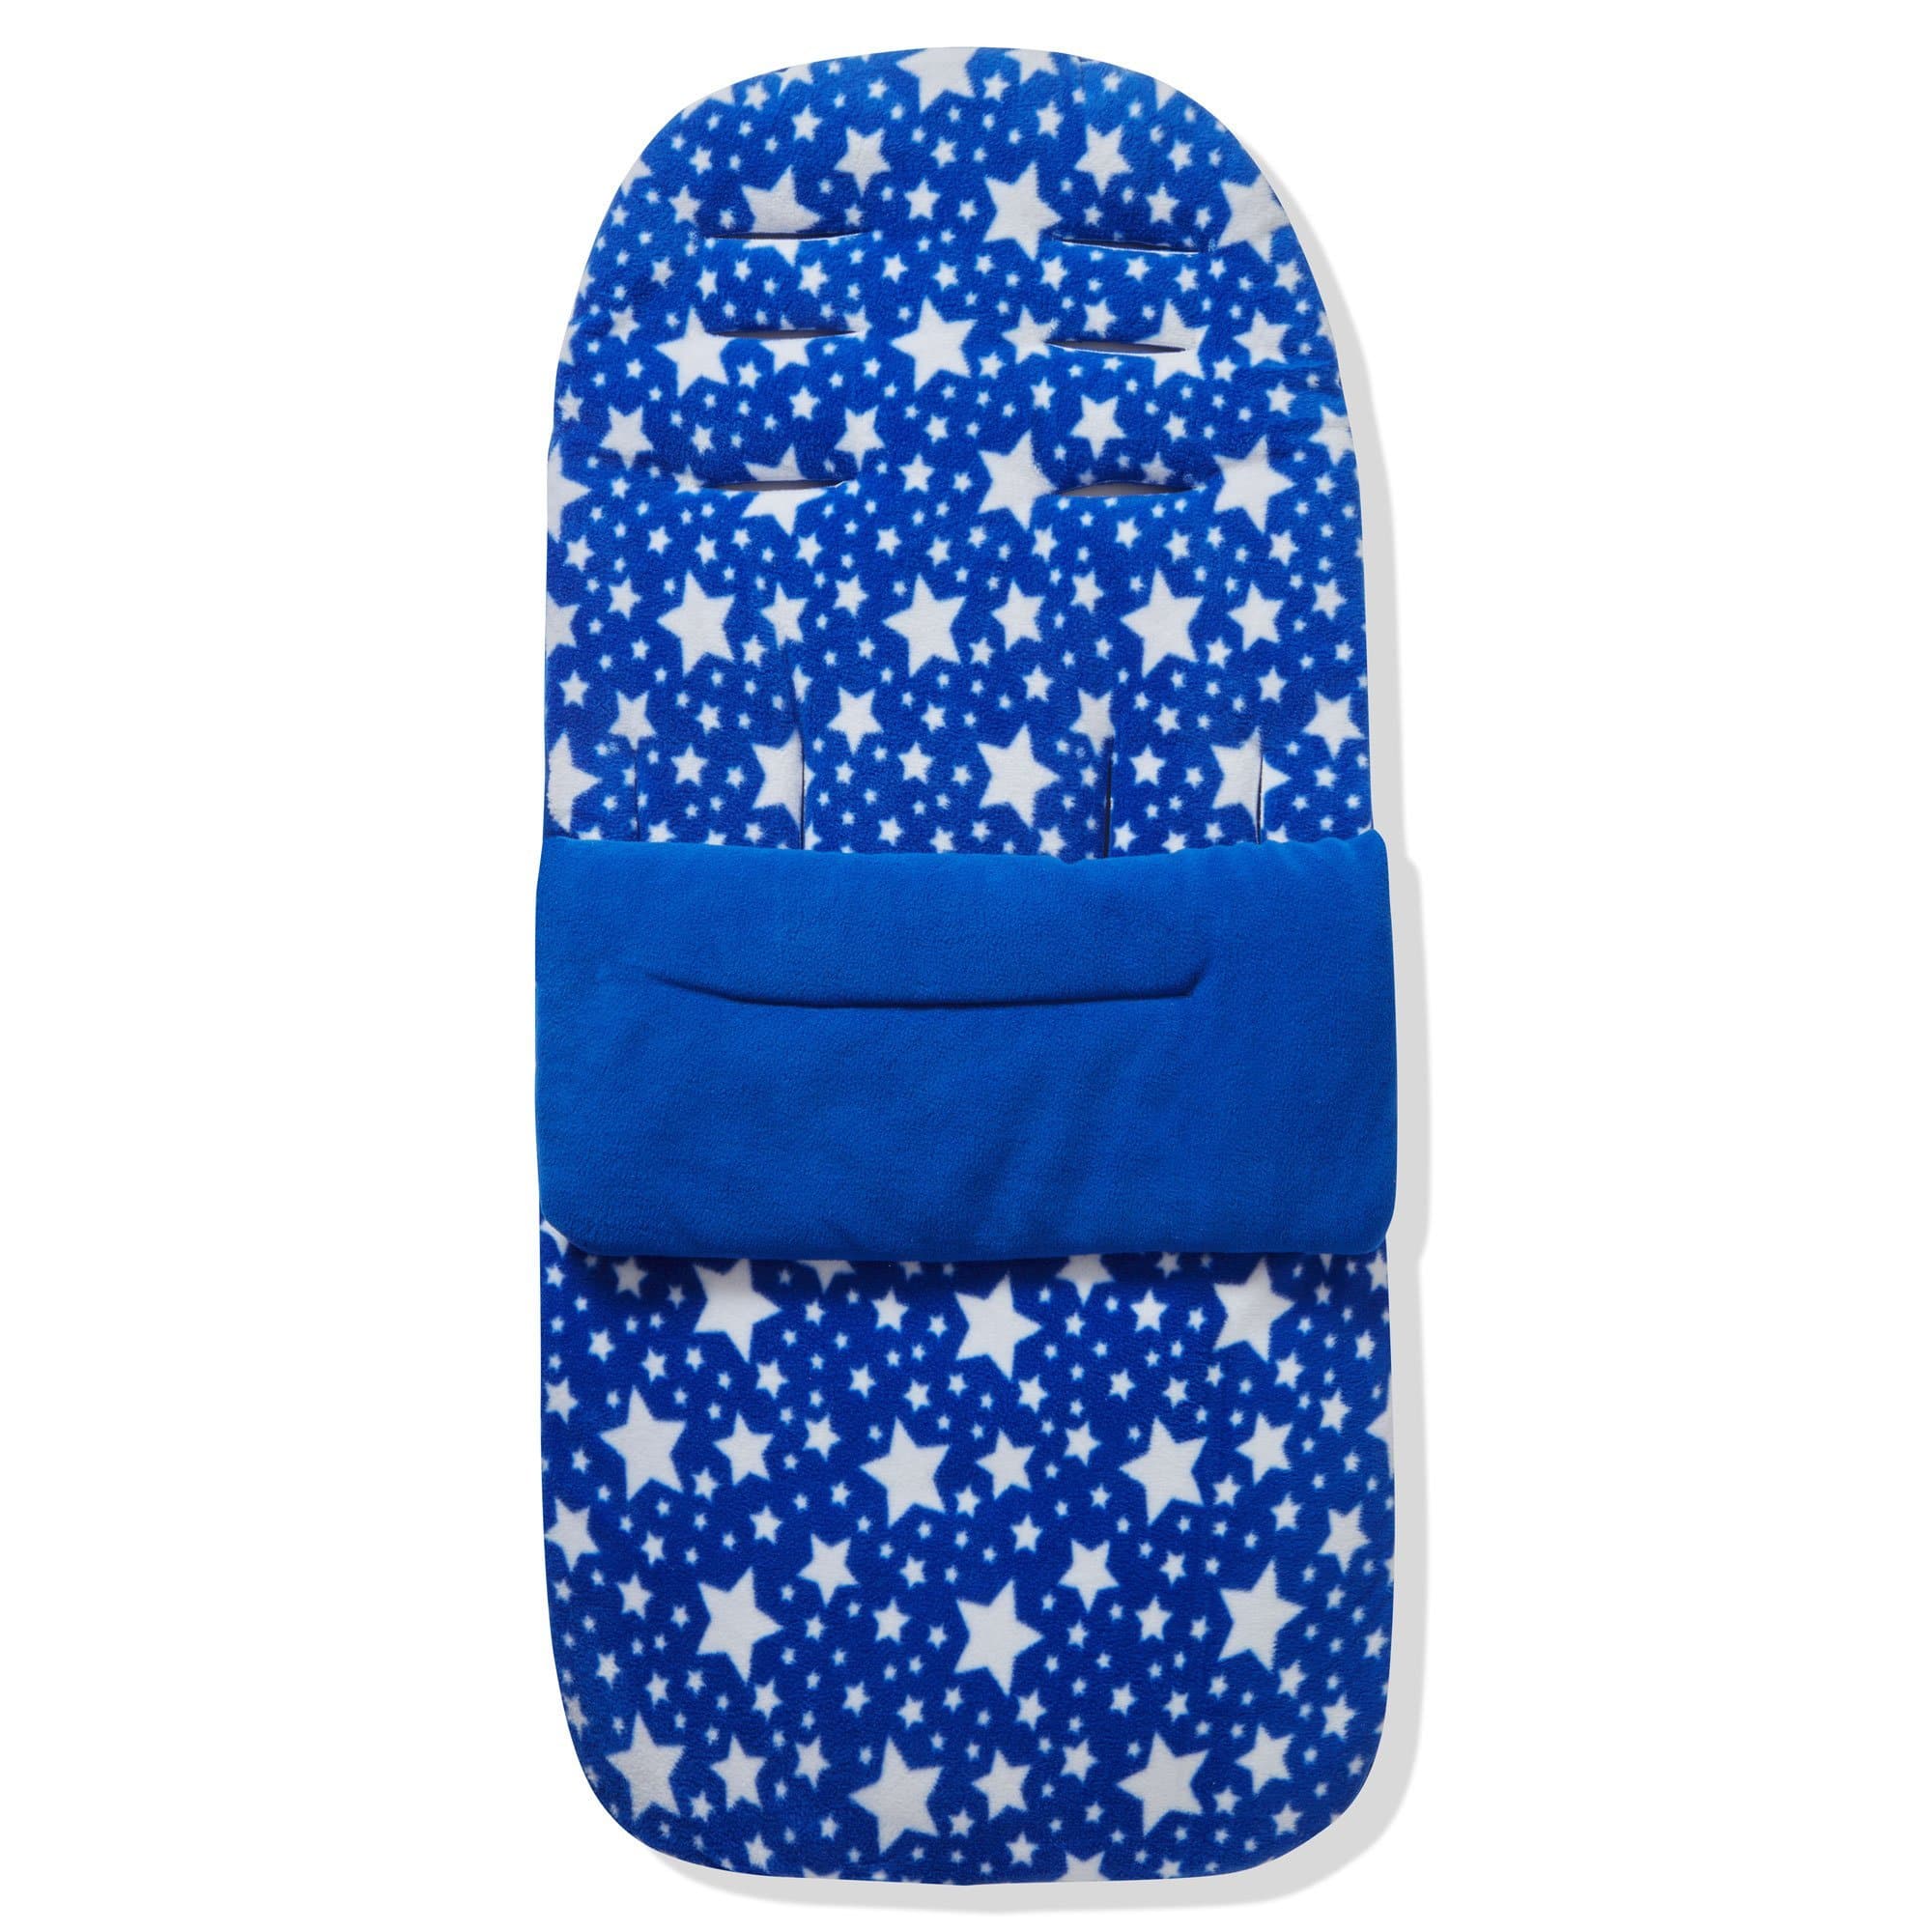 Fleece Footmuff / Cosy Toes Compatible with Infababy - Blue Star / Fits All Models | For Your Little One